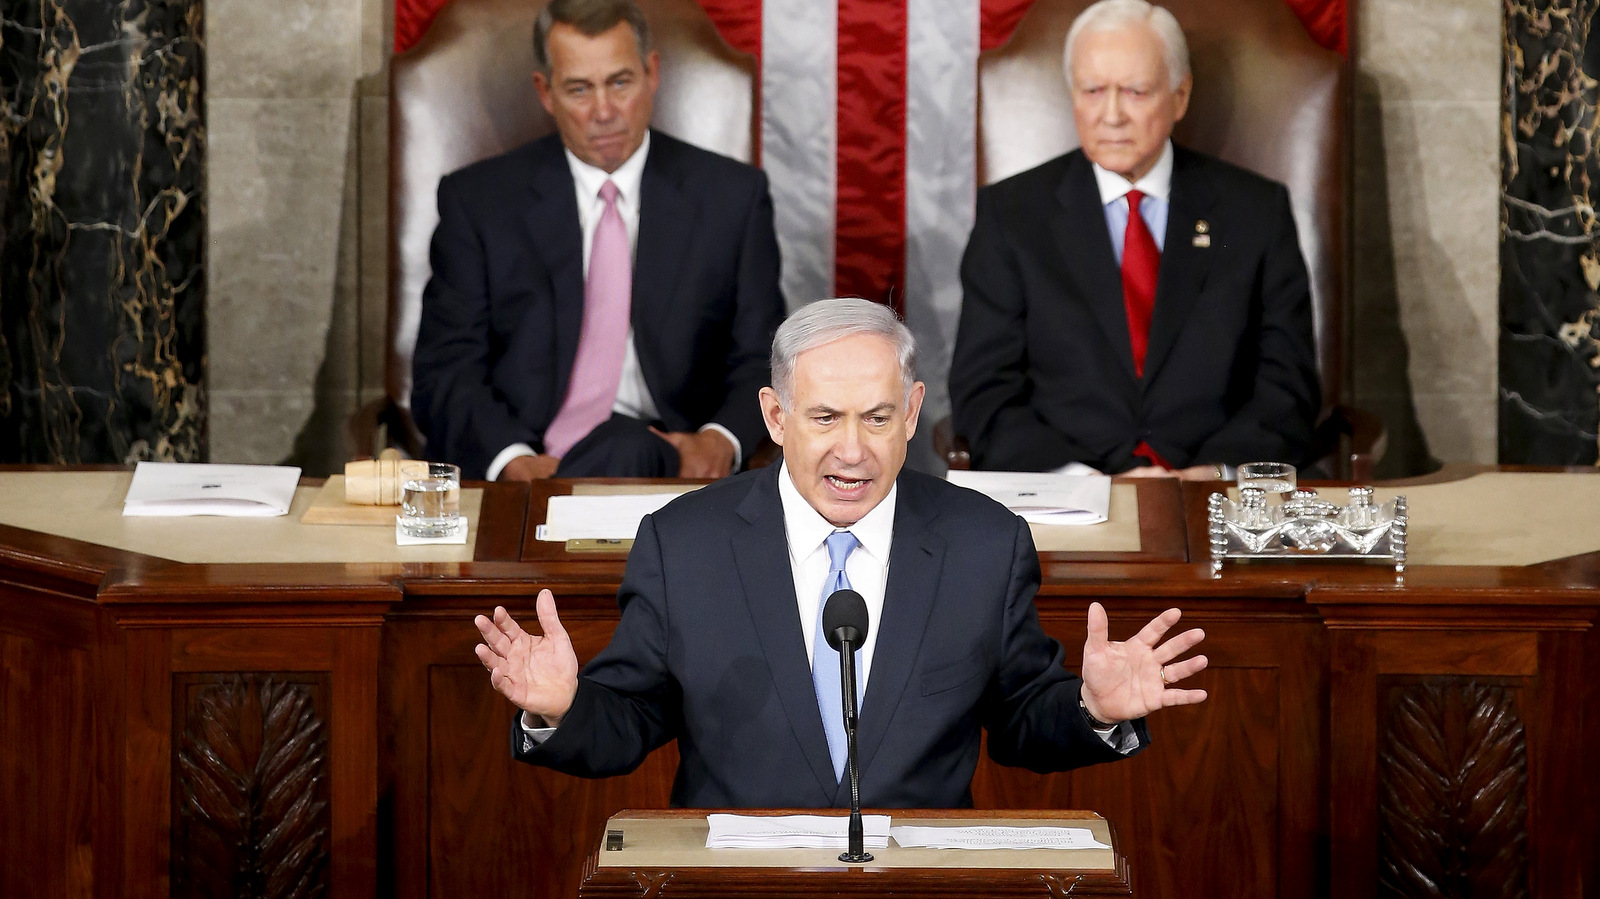 Israeli Prime Minister Benjamin Netanyahu speaks before a joint meeting of Congress on Capitol Hill in Washington, Tuesday, March 3, 2015. Netanyahu is using the address to warn against trusting Iran to curb its nuclear ambitions. House Speaker John Boehner of Ohio, left, and Sen. Orrin Hatch, R-Utah, listen. (AP Photo/Andrew Harnik)